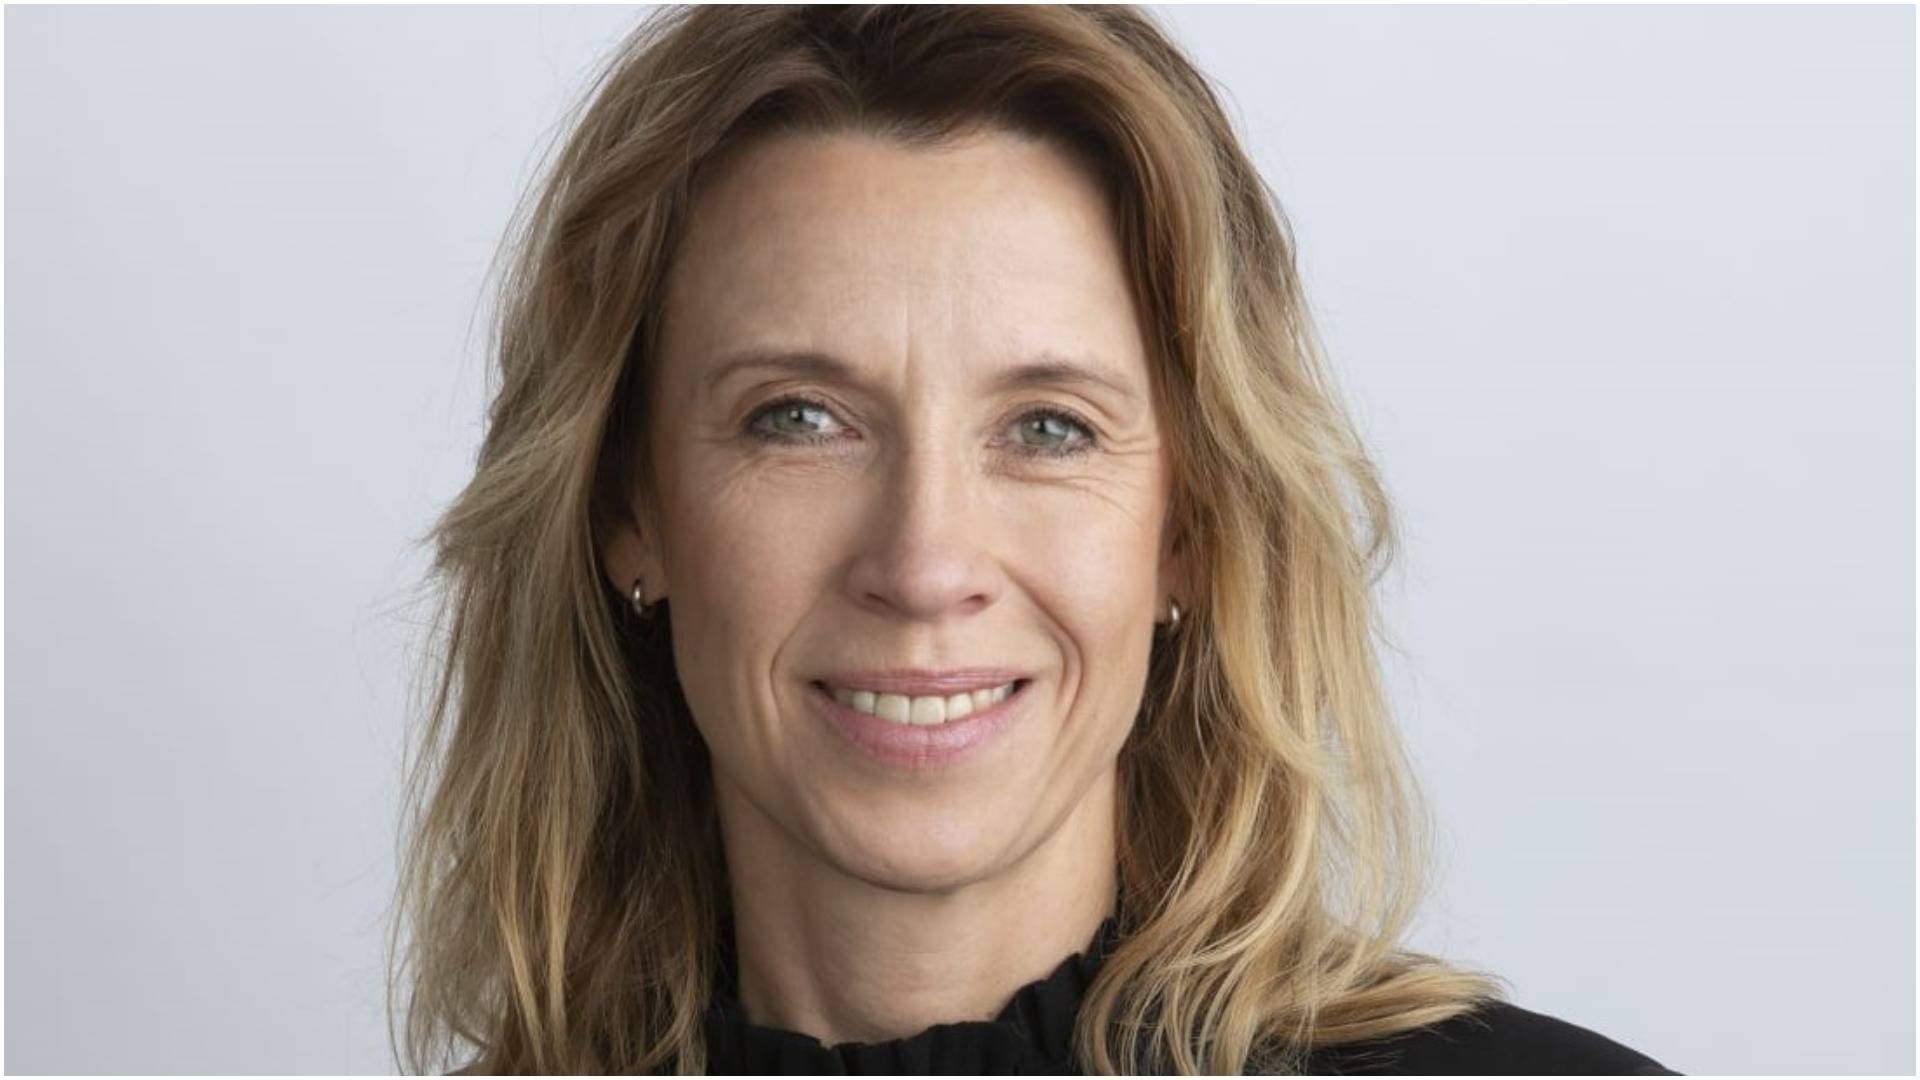 Karin Parmenstam joins Swedfund on 1 March as Head of Investment Operations. | Photo: Swedfund PR.